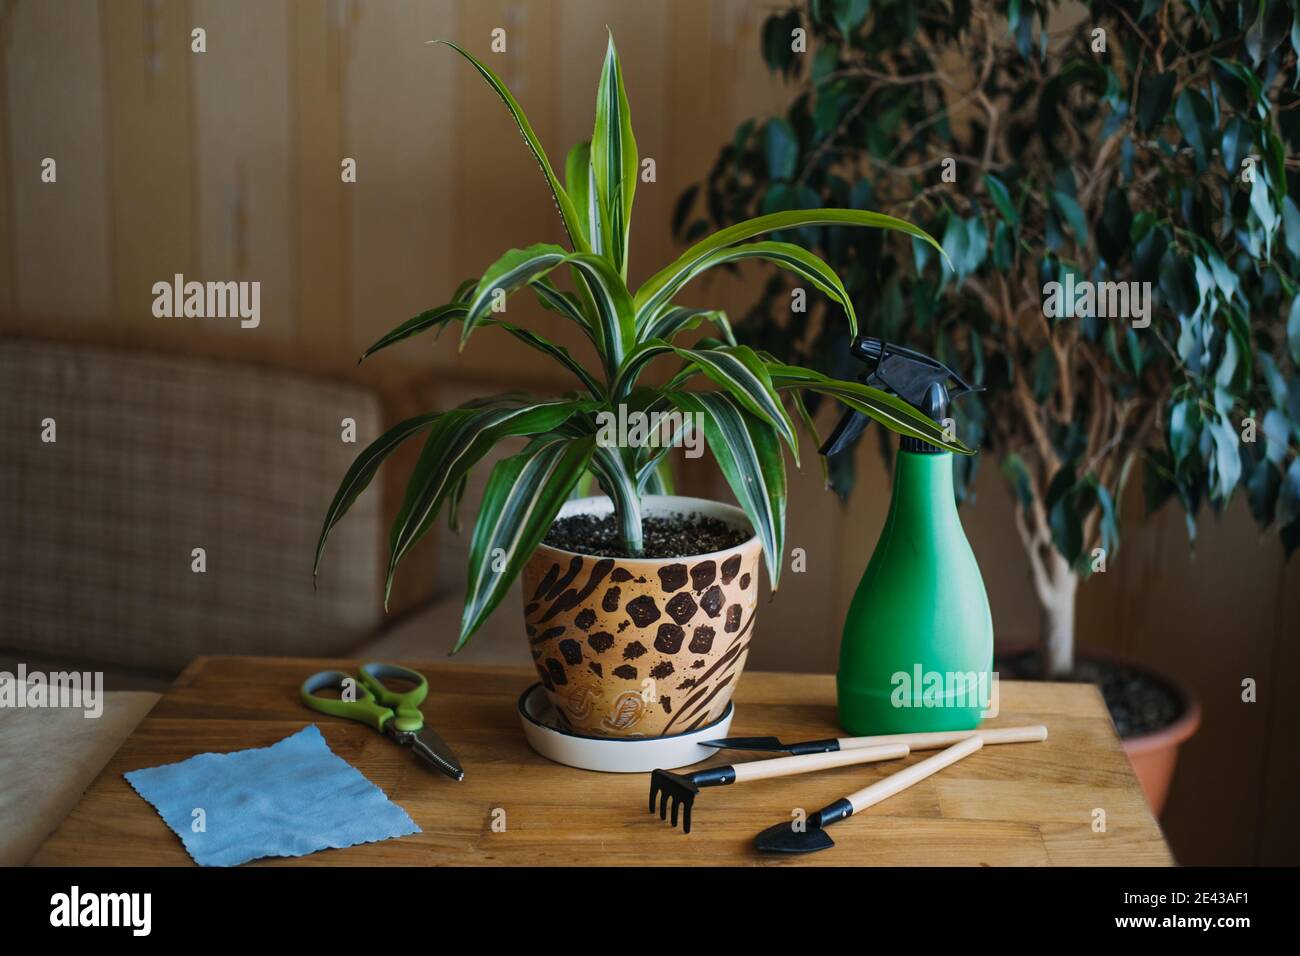 Spring Houseplant Care, Waking Up Indoor Plants for Spring. Female hands spray and washes the leaves of Dracaena fragrans house plants at home. Garden Stock Photo